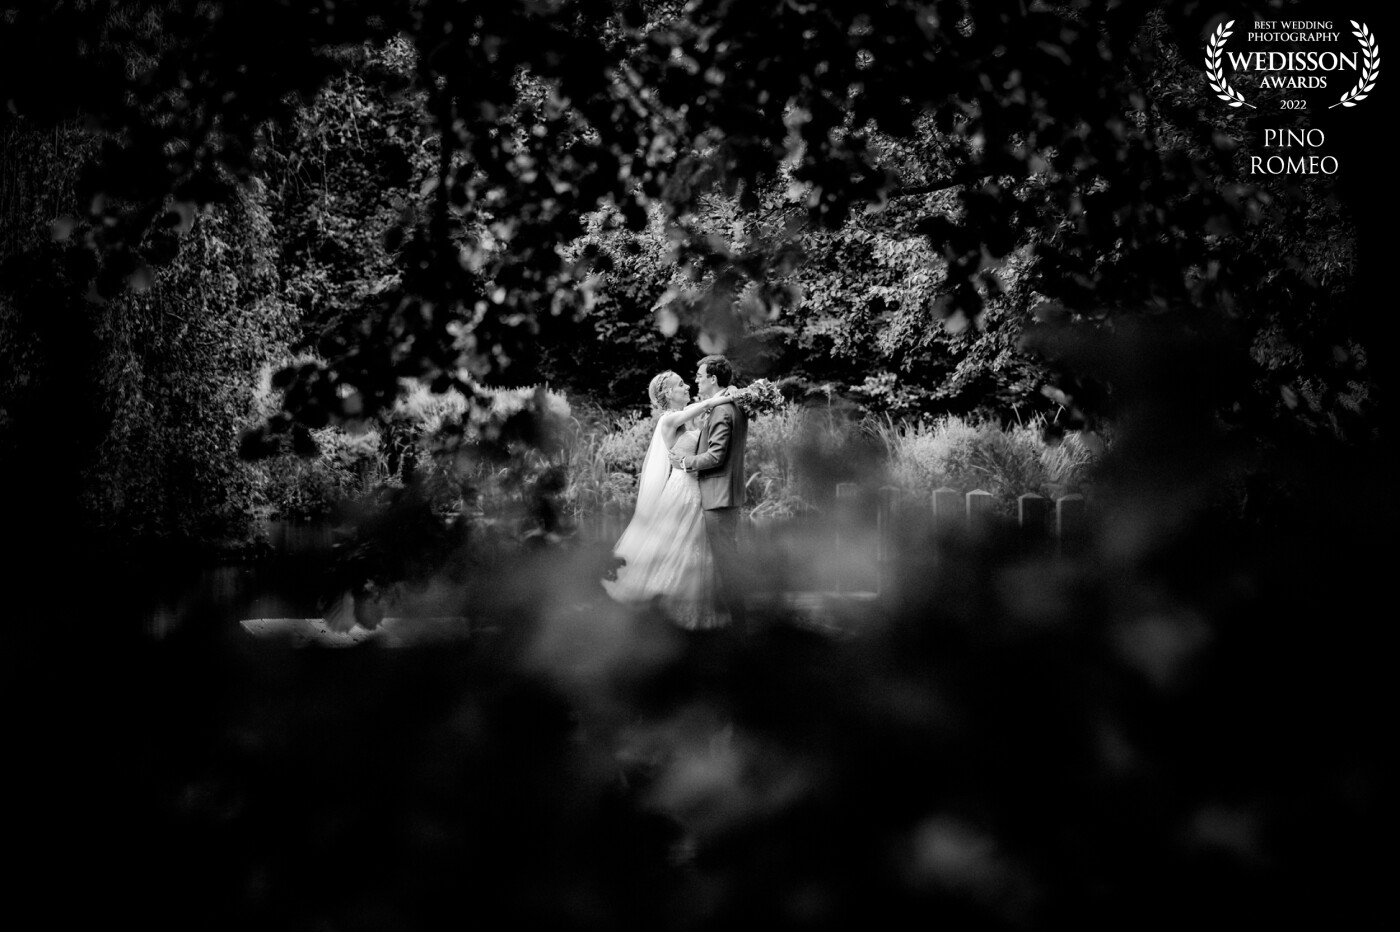 Laura and Adrien enjoy a moment together in the gardens of the Domaine de Béronsart.  A couple's portrait session, during the wedding day, should be a moment of pleasure for the newlyweds.